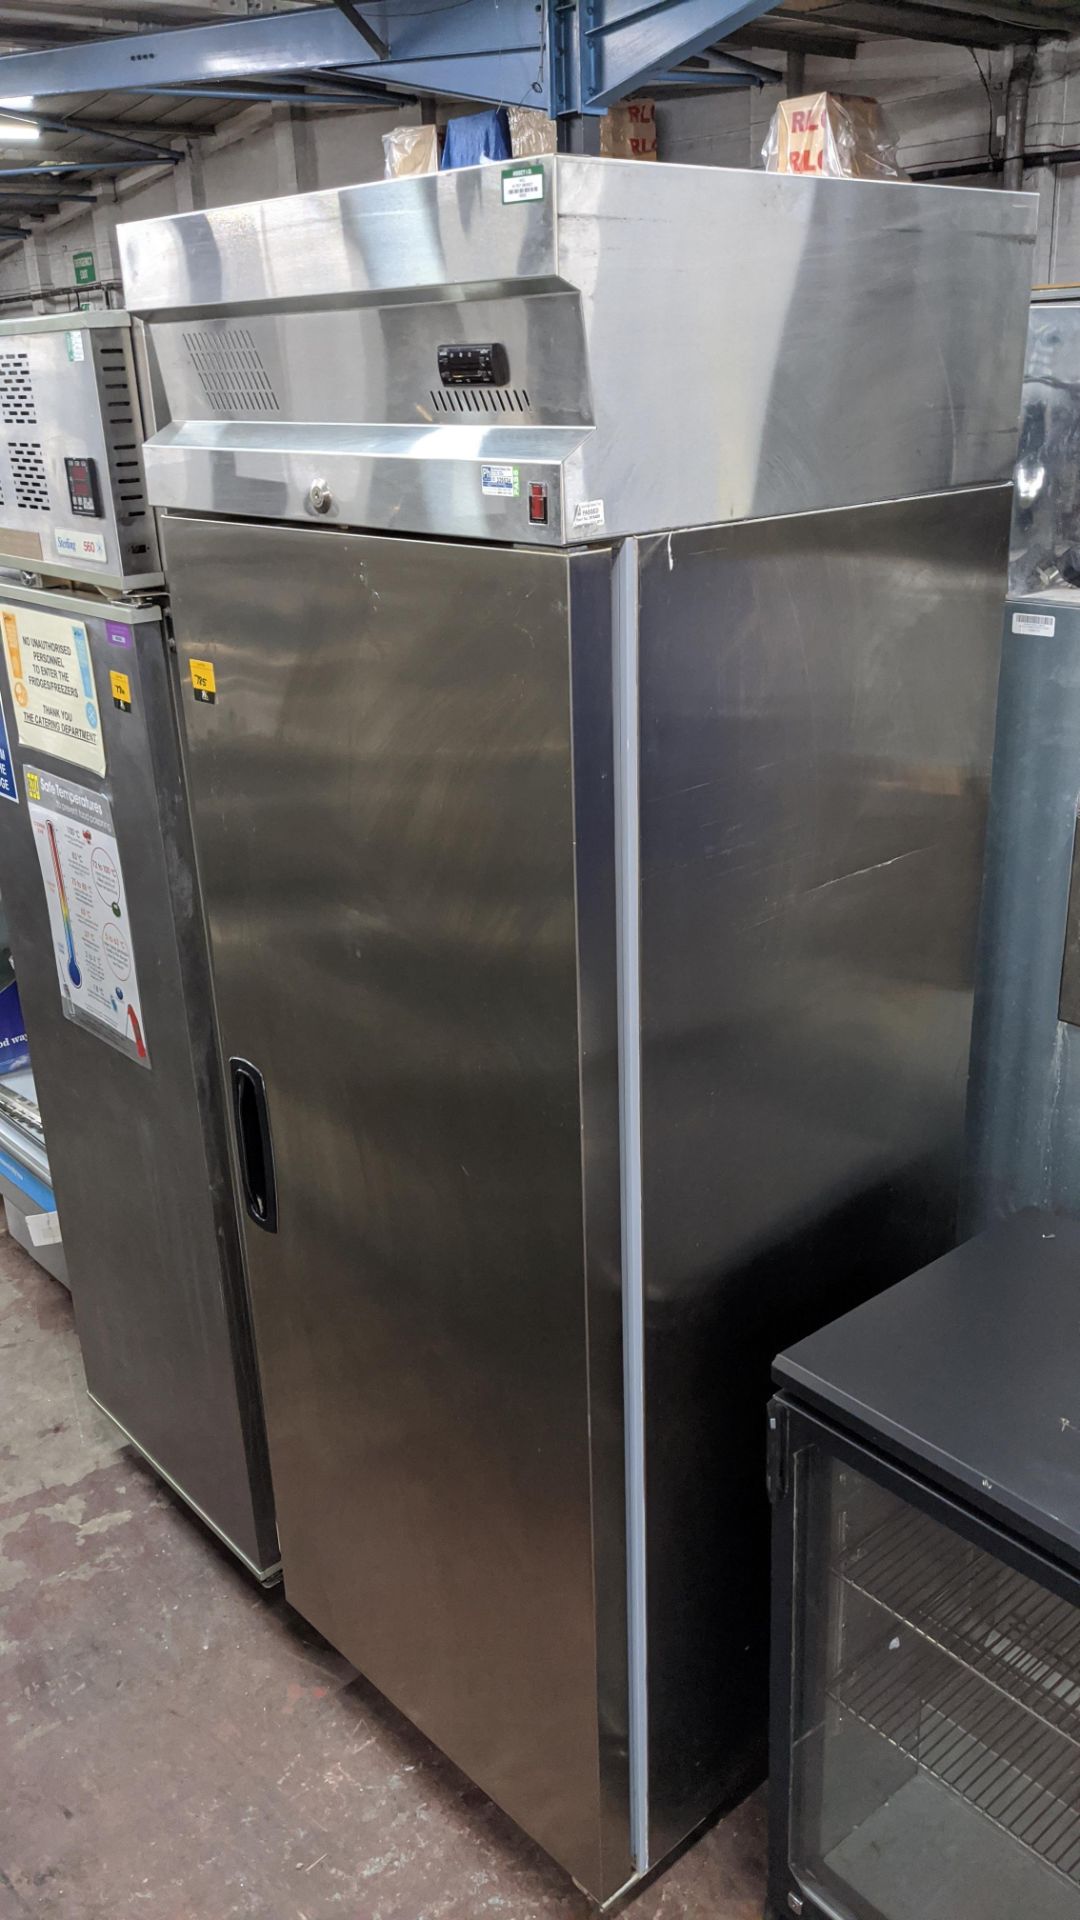 Inomak tall stainless steel mobile commercial freezer - model CB170. NB this unit is lockable, - Image 2 of 4